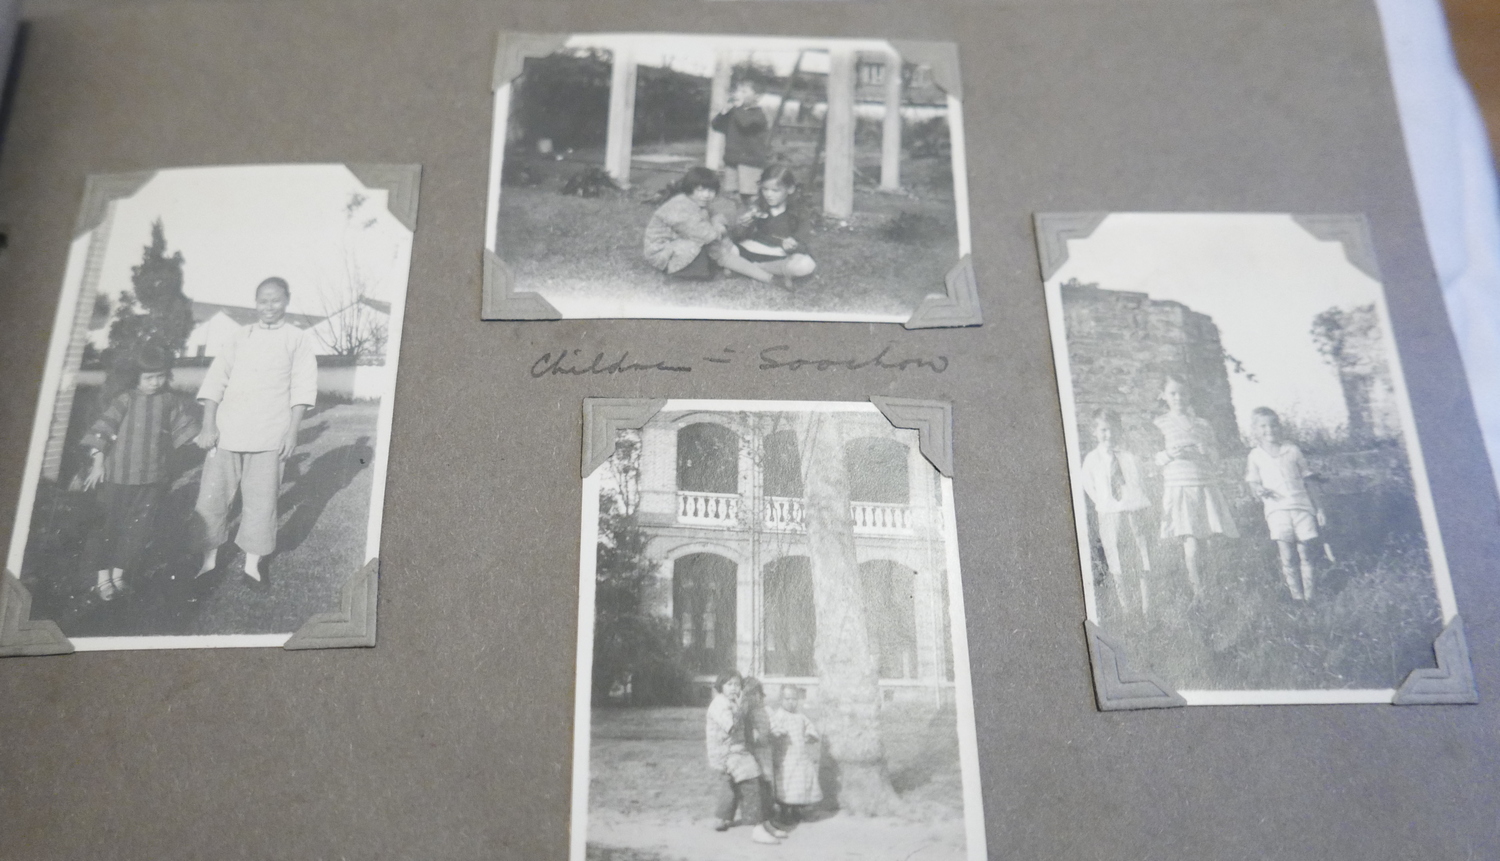 Album of Photo's of Missionary Family in China - Shangai and Soochow c1930 - approx 60 images-c1930 - Image 4 of 14